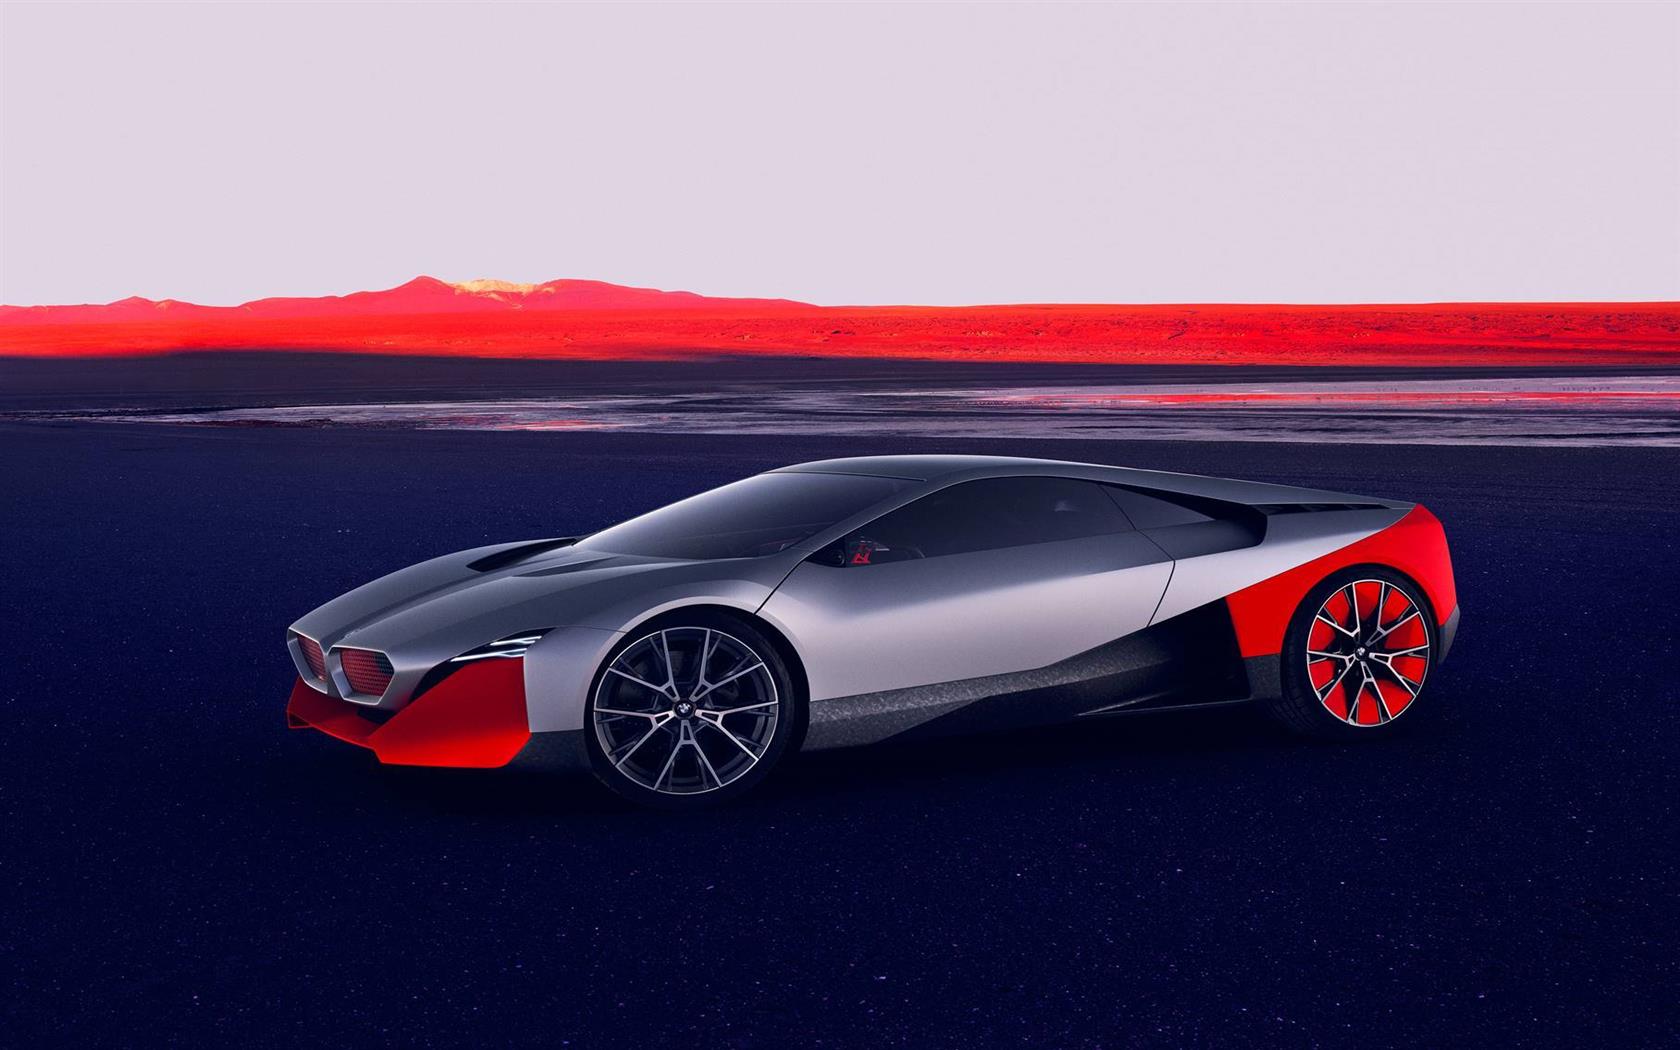 The Future Is Now: Unveiling The 2019 BMW Vision M Next Concept